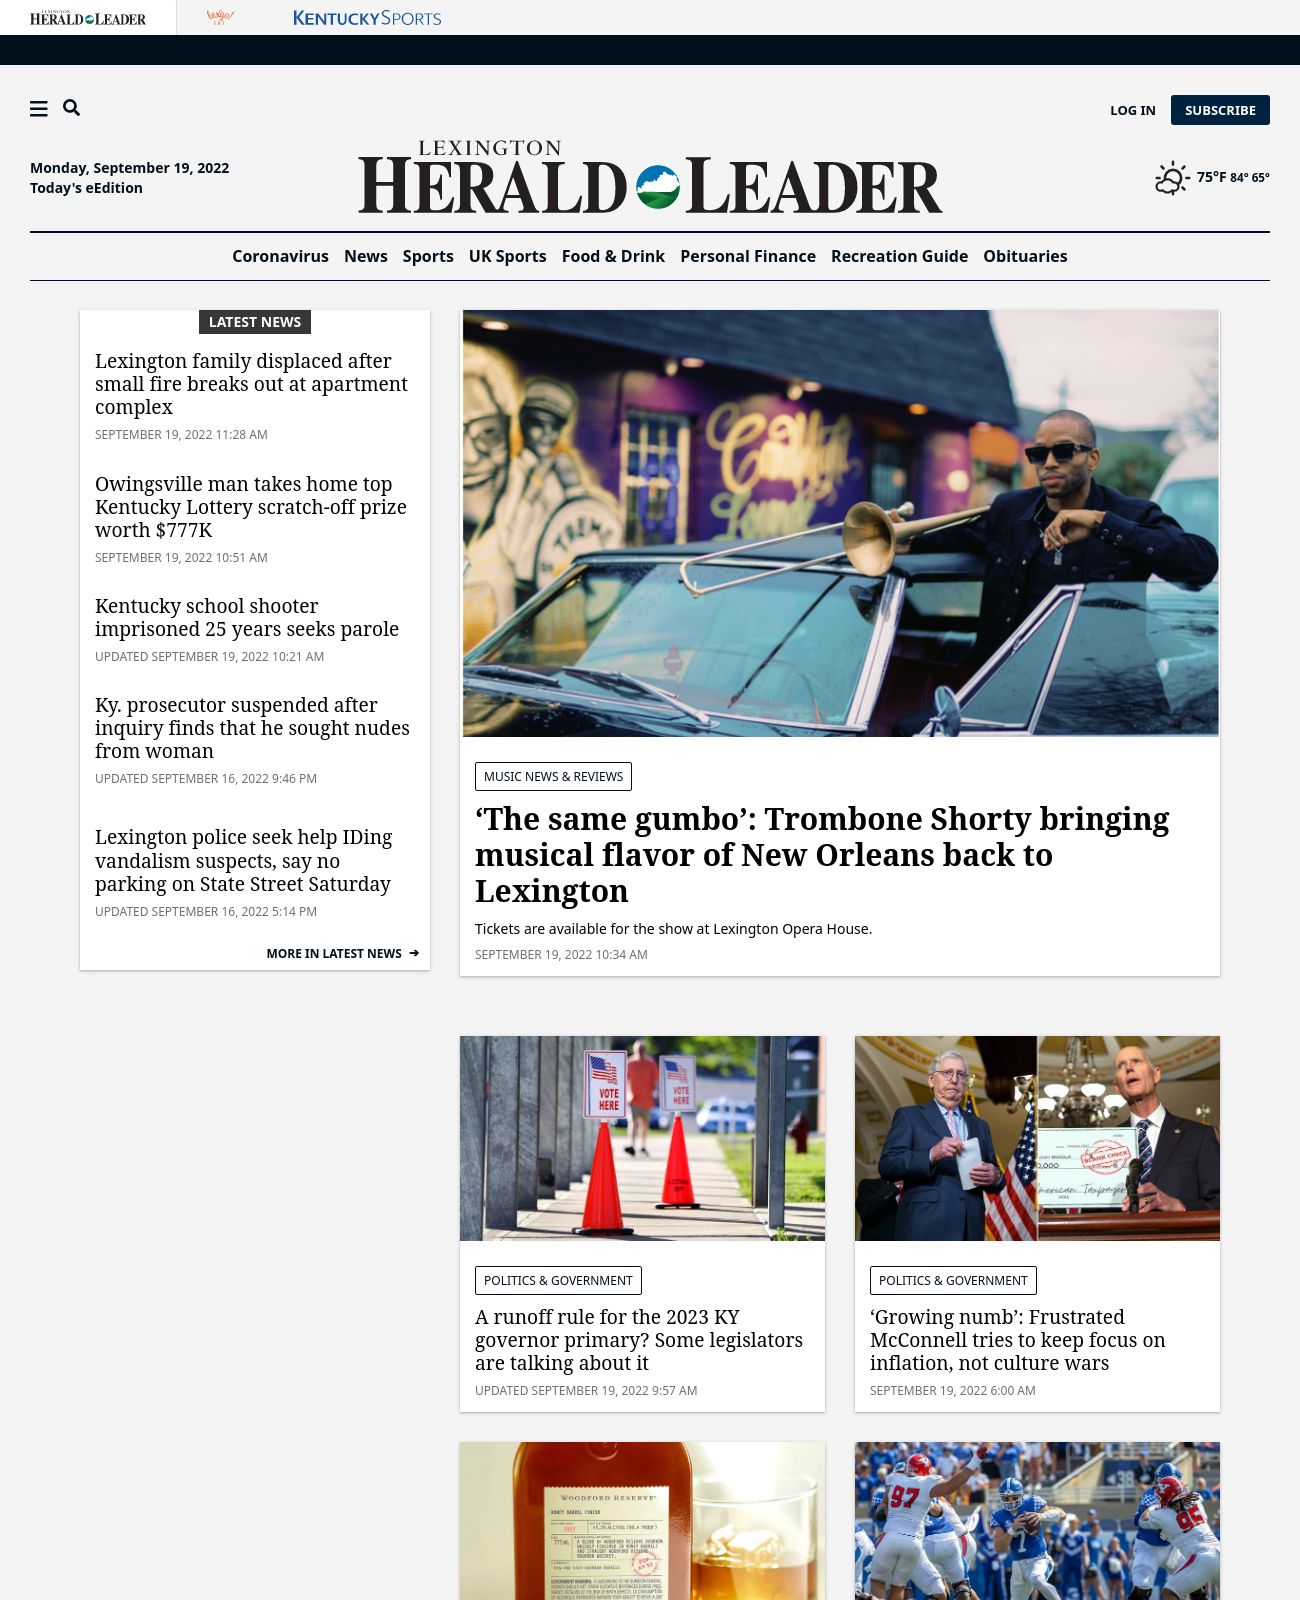 Lexington Herald-Leader at 2022-09-19 12:02:57-04:00 local time